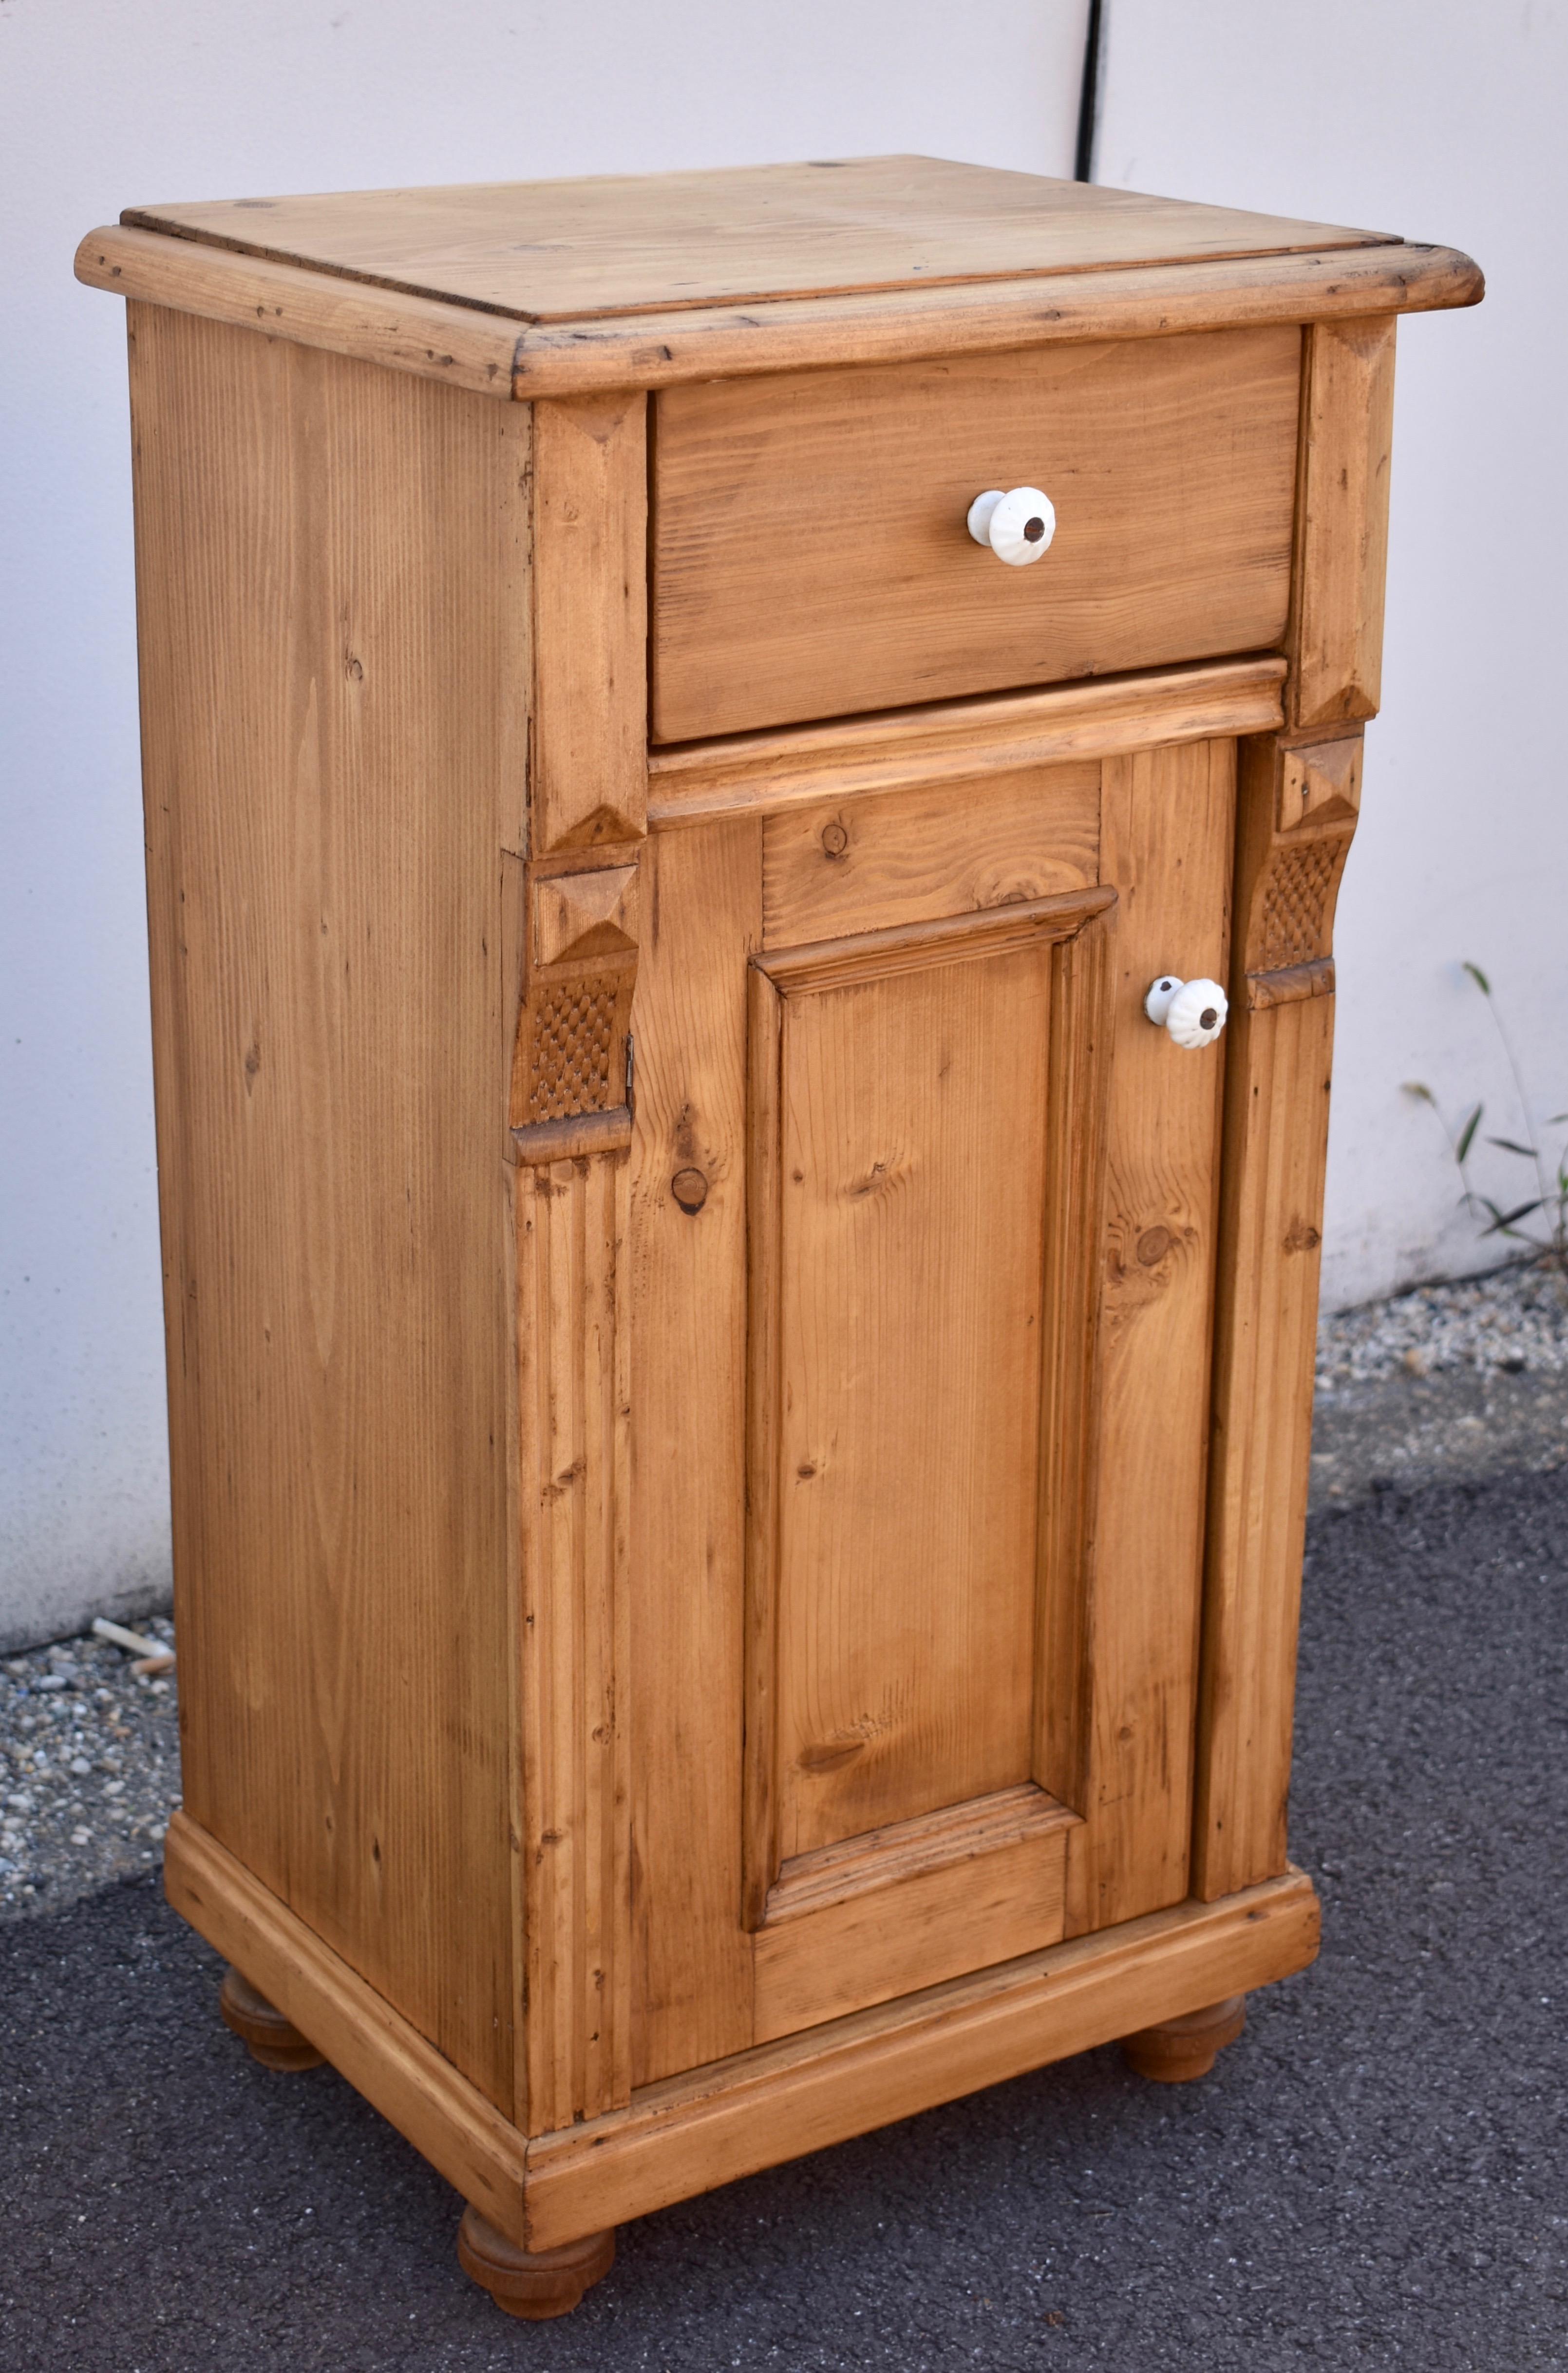 This is a pretty little nightstand with a very shallow profile.  A step-down edge on the top is created with applied quarter round molding.  The hand-cut dovetailed drawer is quite deep and stands proud of the flat-paneled door beneath.  The front